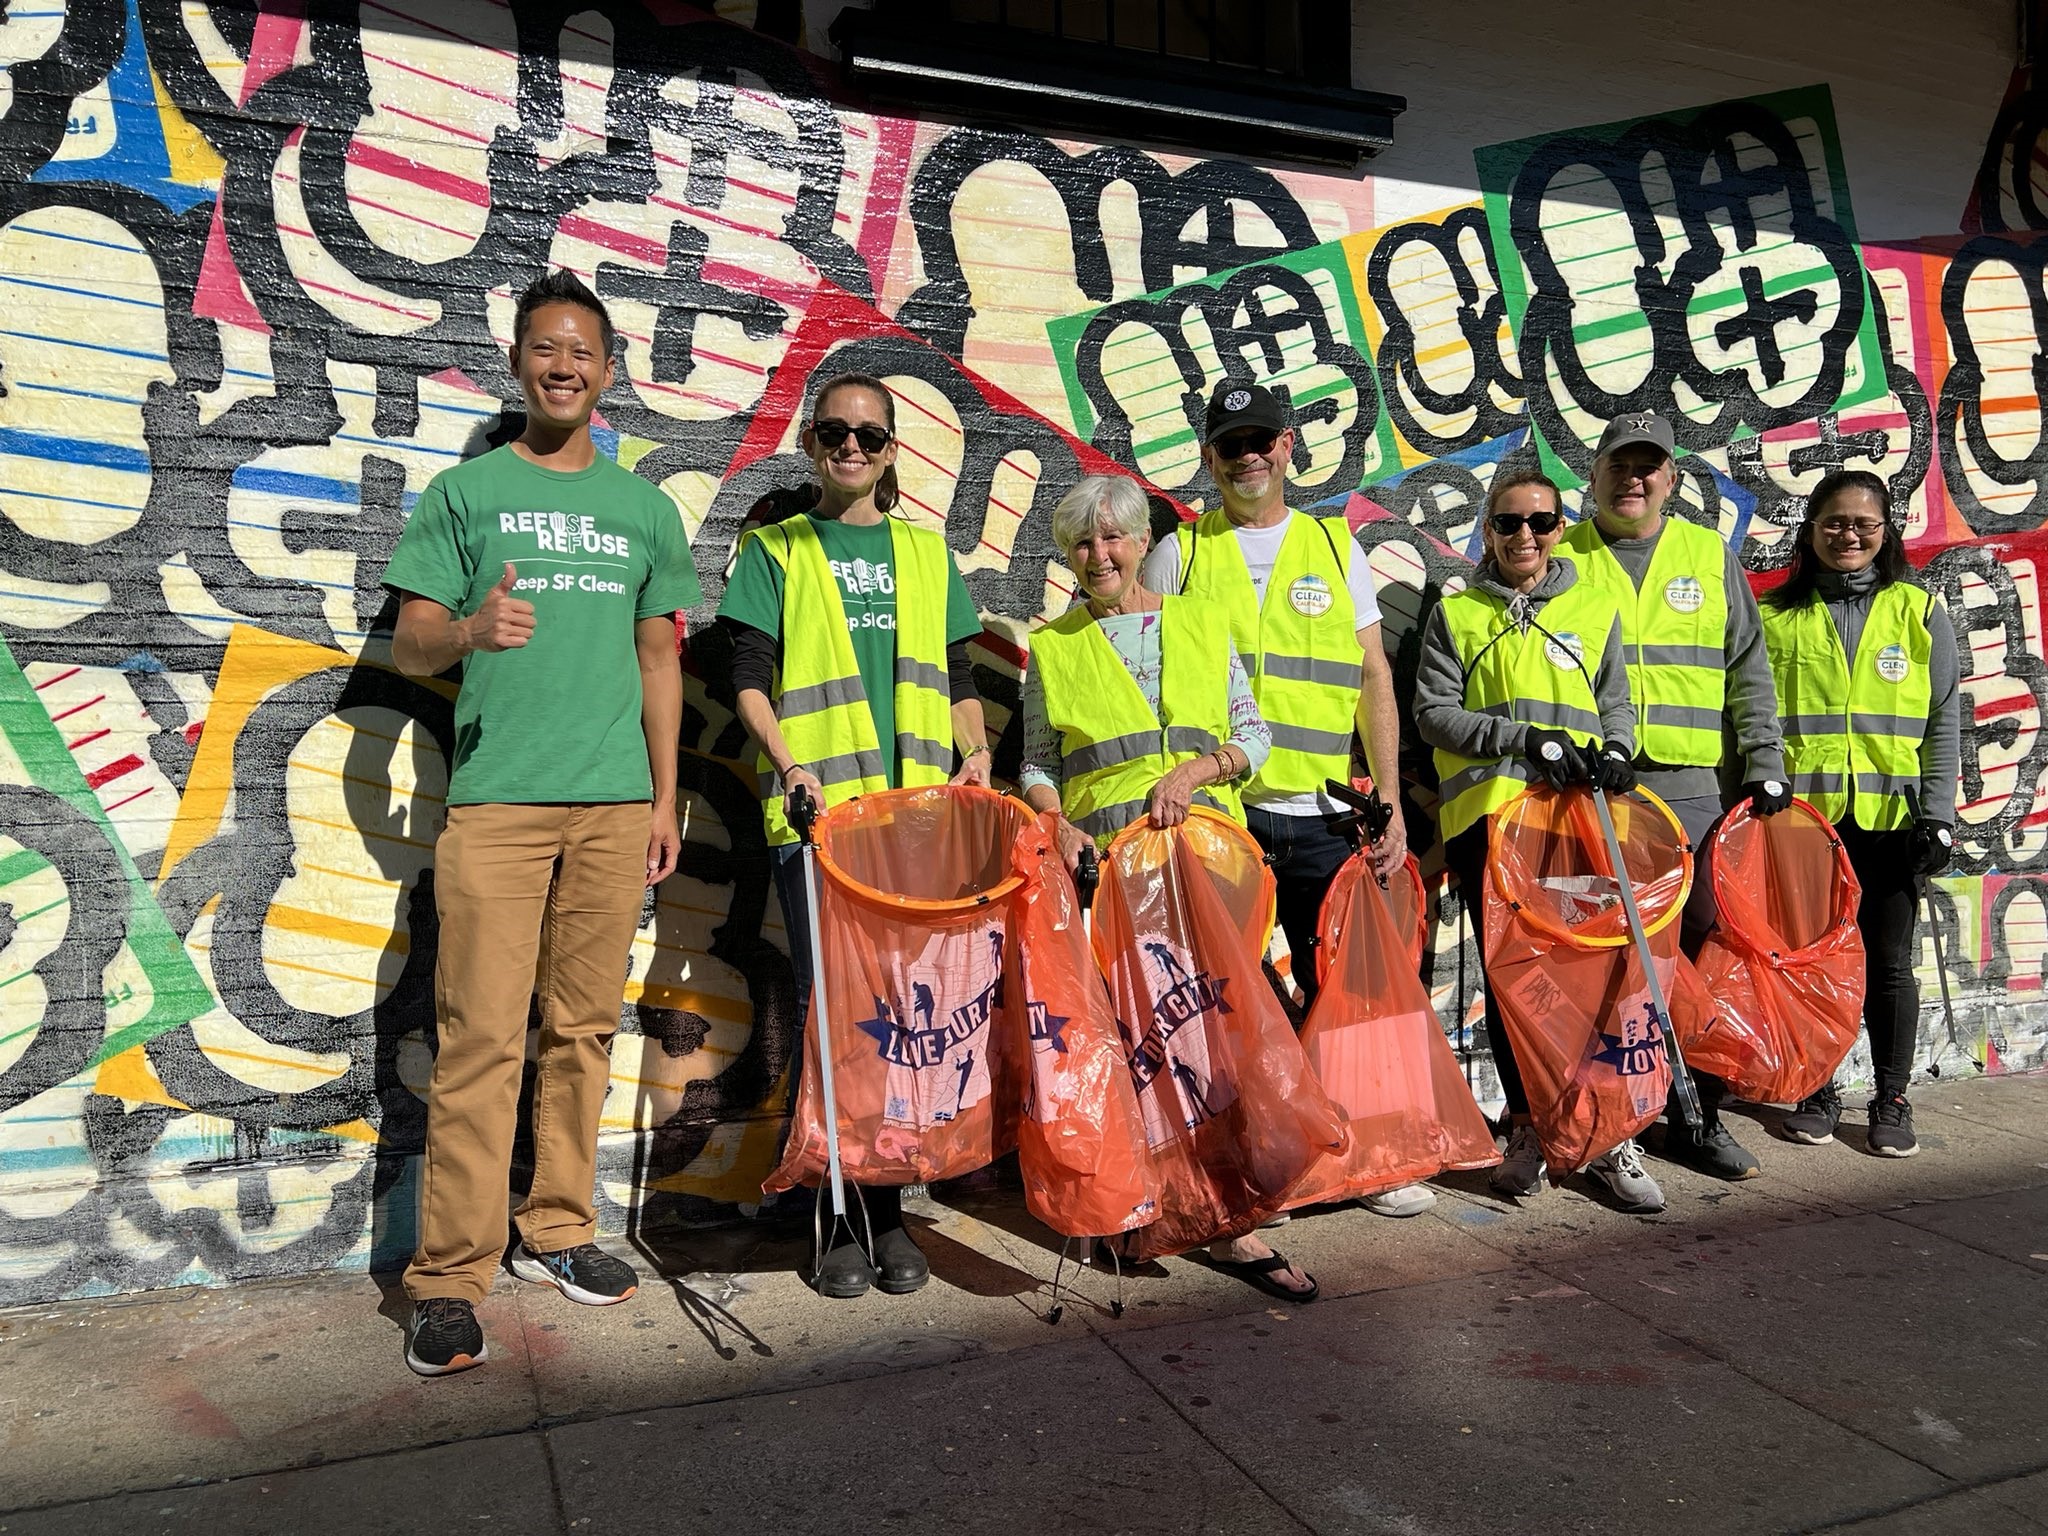 Group photo of volunteers with litter grabbers and trash bags during a community cleanup event.